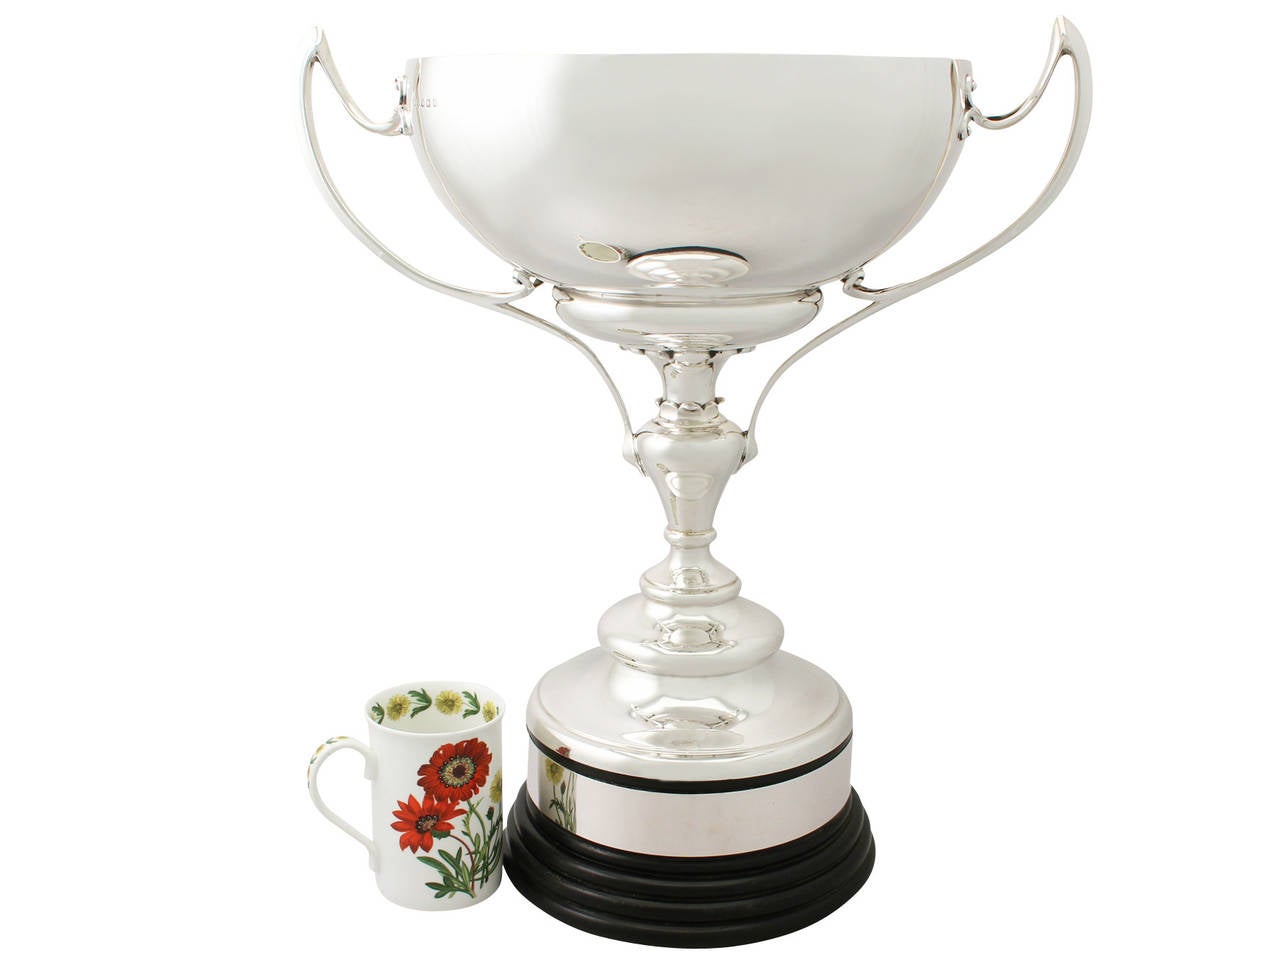 A fine and impressive, large antique George V English sterling silver presentation cup/bowl in the Art Nouveau style; part of our presentation silverware collection

This fine antique George V sterling silver presentation cup/bowl has a plain